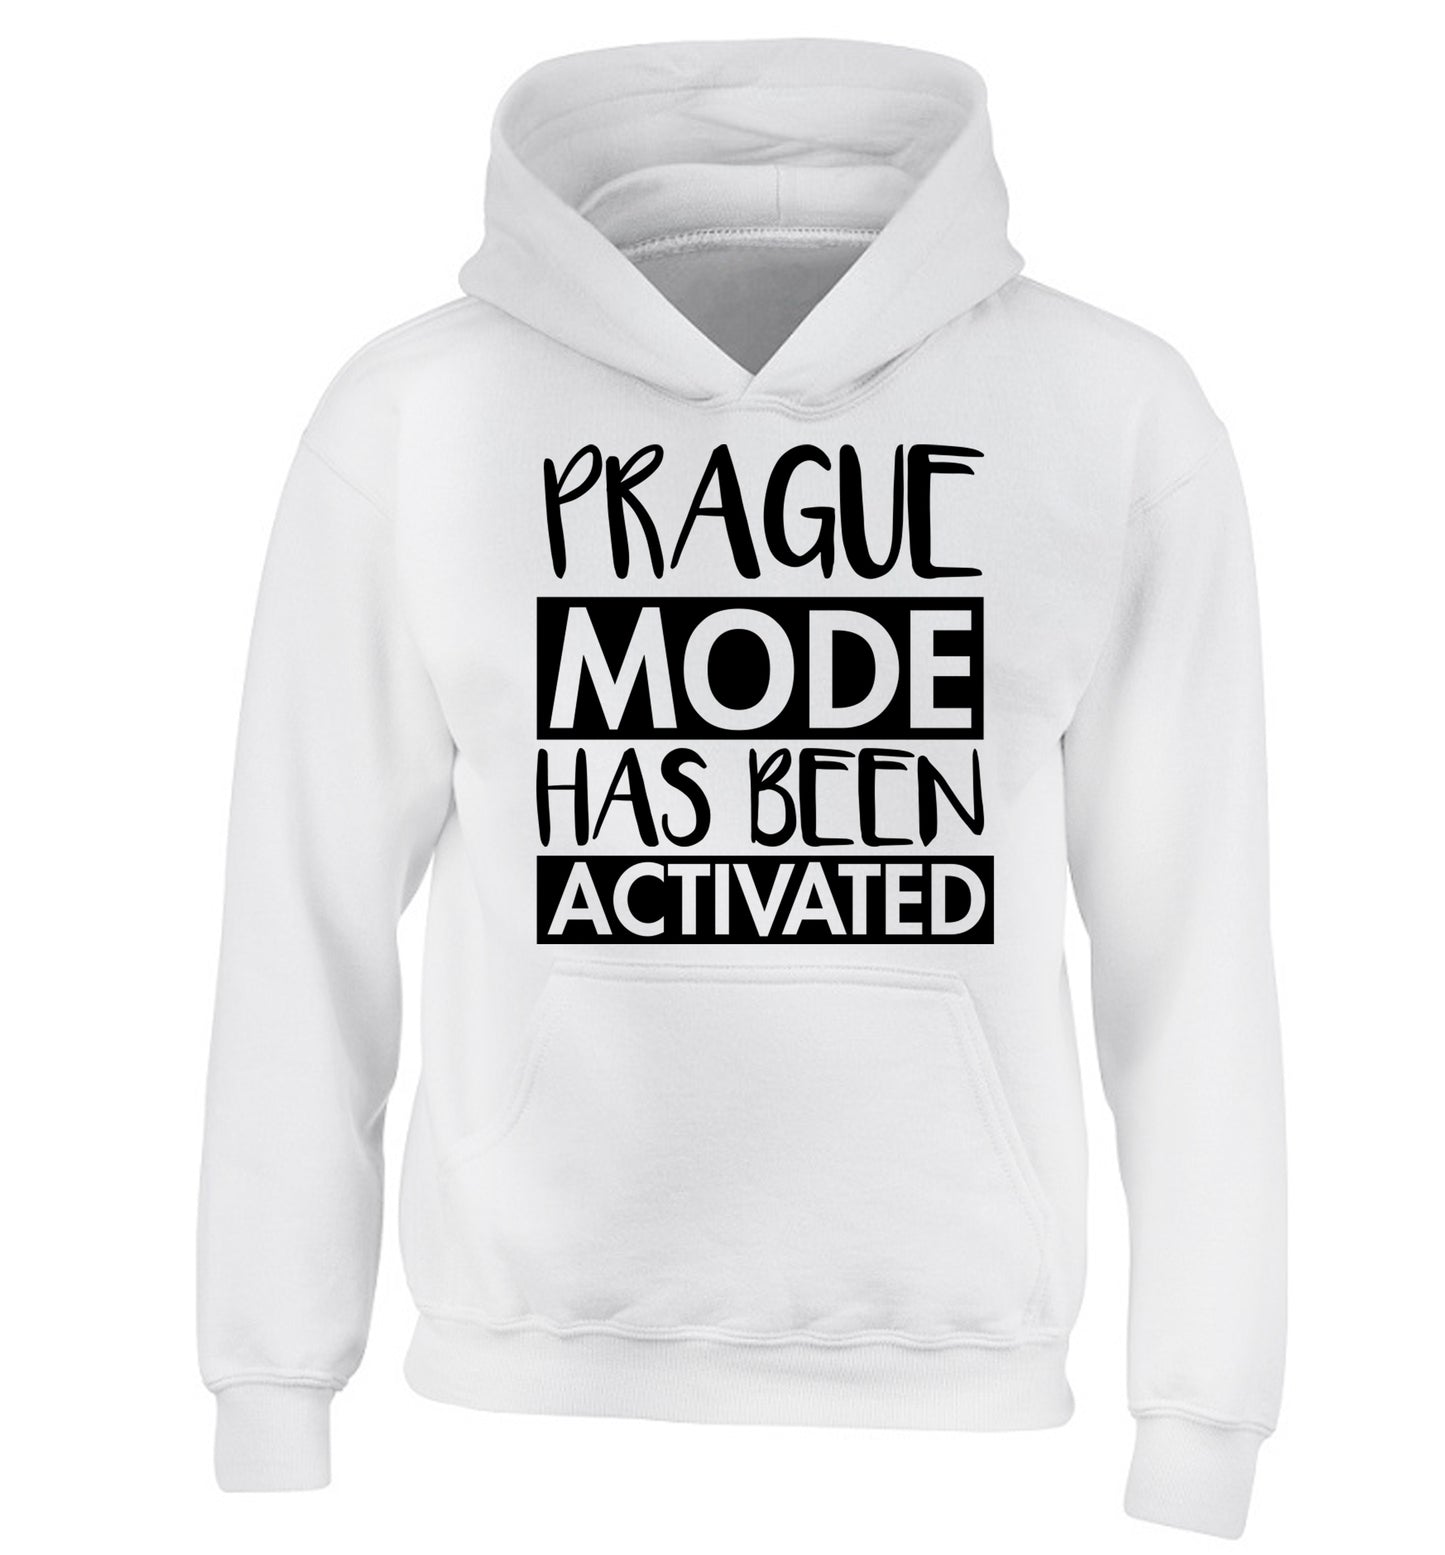 Prague mode has been activated children's white hoodie 12-13 Years